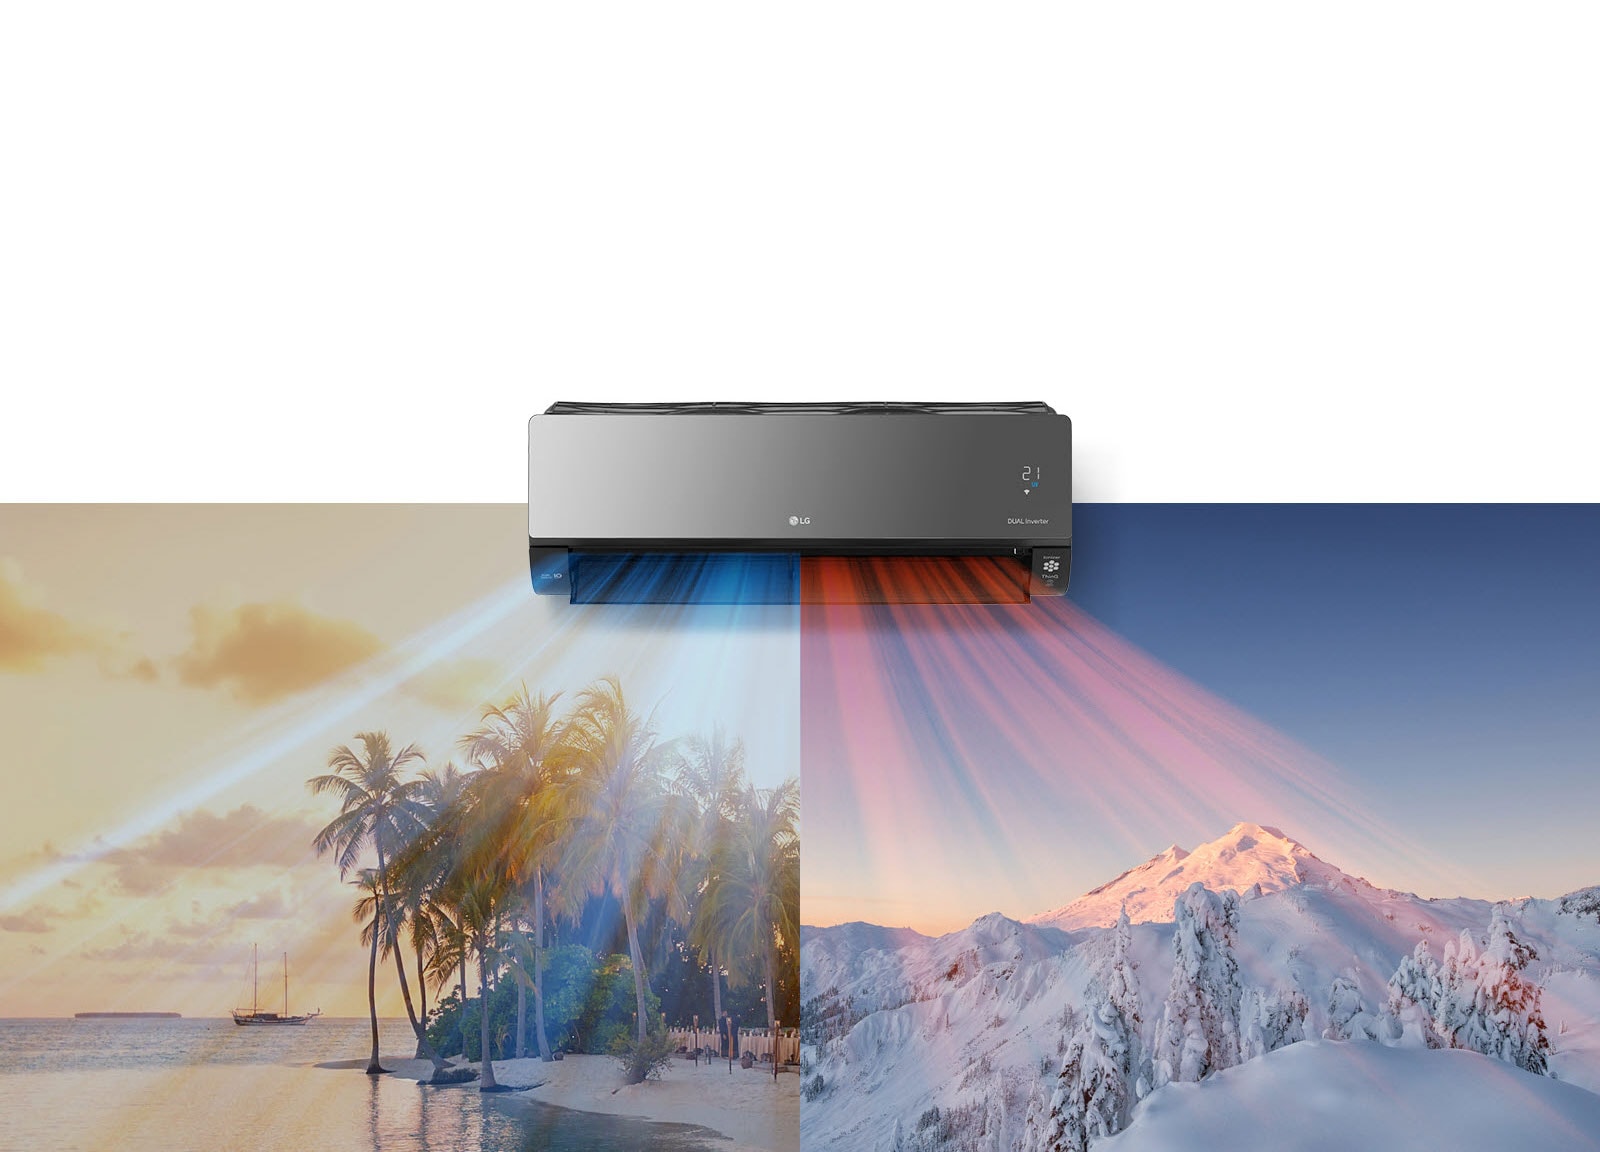 An LG air conditioner is hanging at the top center of the image. Beneath it are two images, one image shows a hot beach scene and the other shows a snowy mountain scene. Air blows out of the air conditioner with cool blue air on the beach scene and warm red air across the snowy scene.